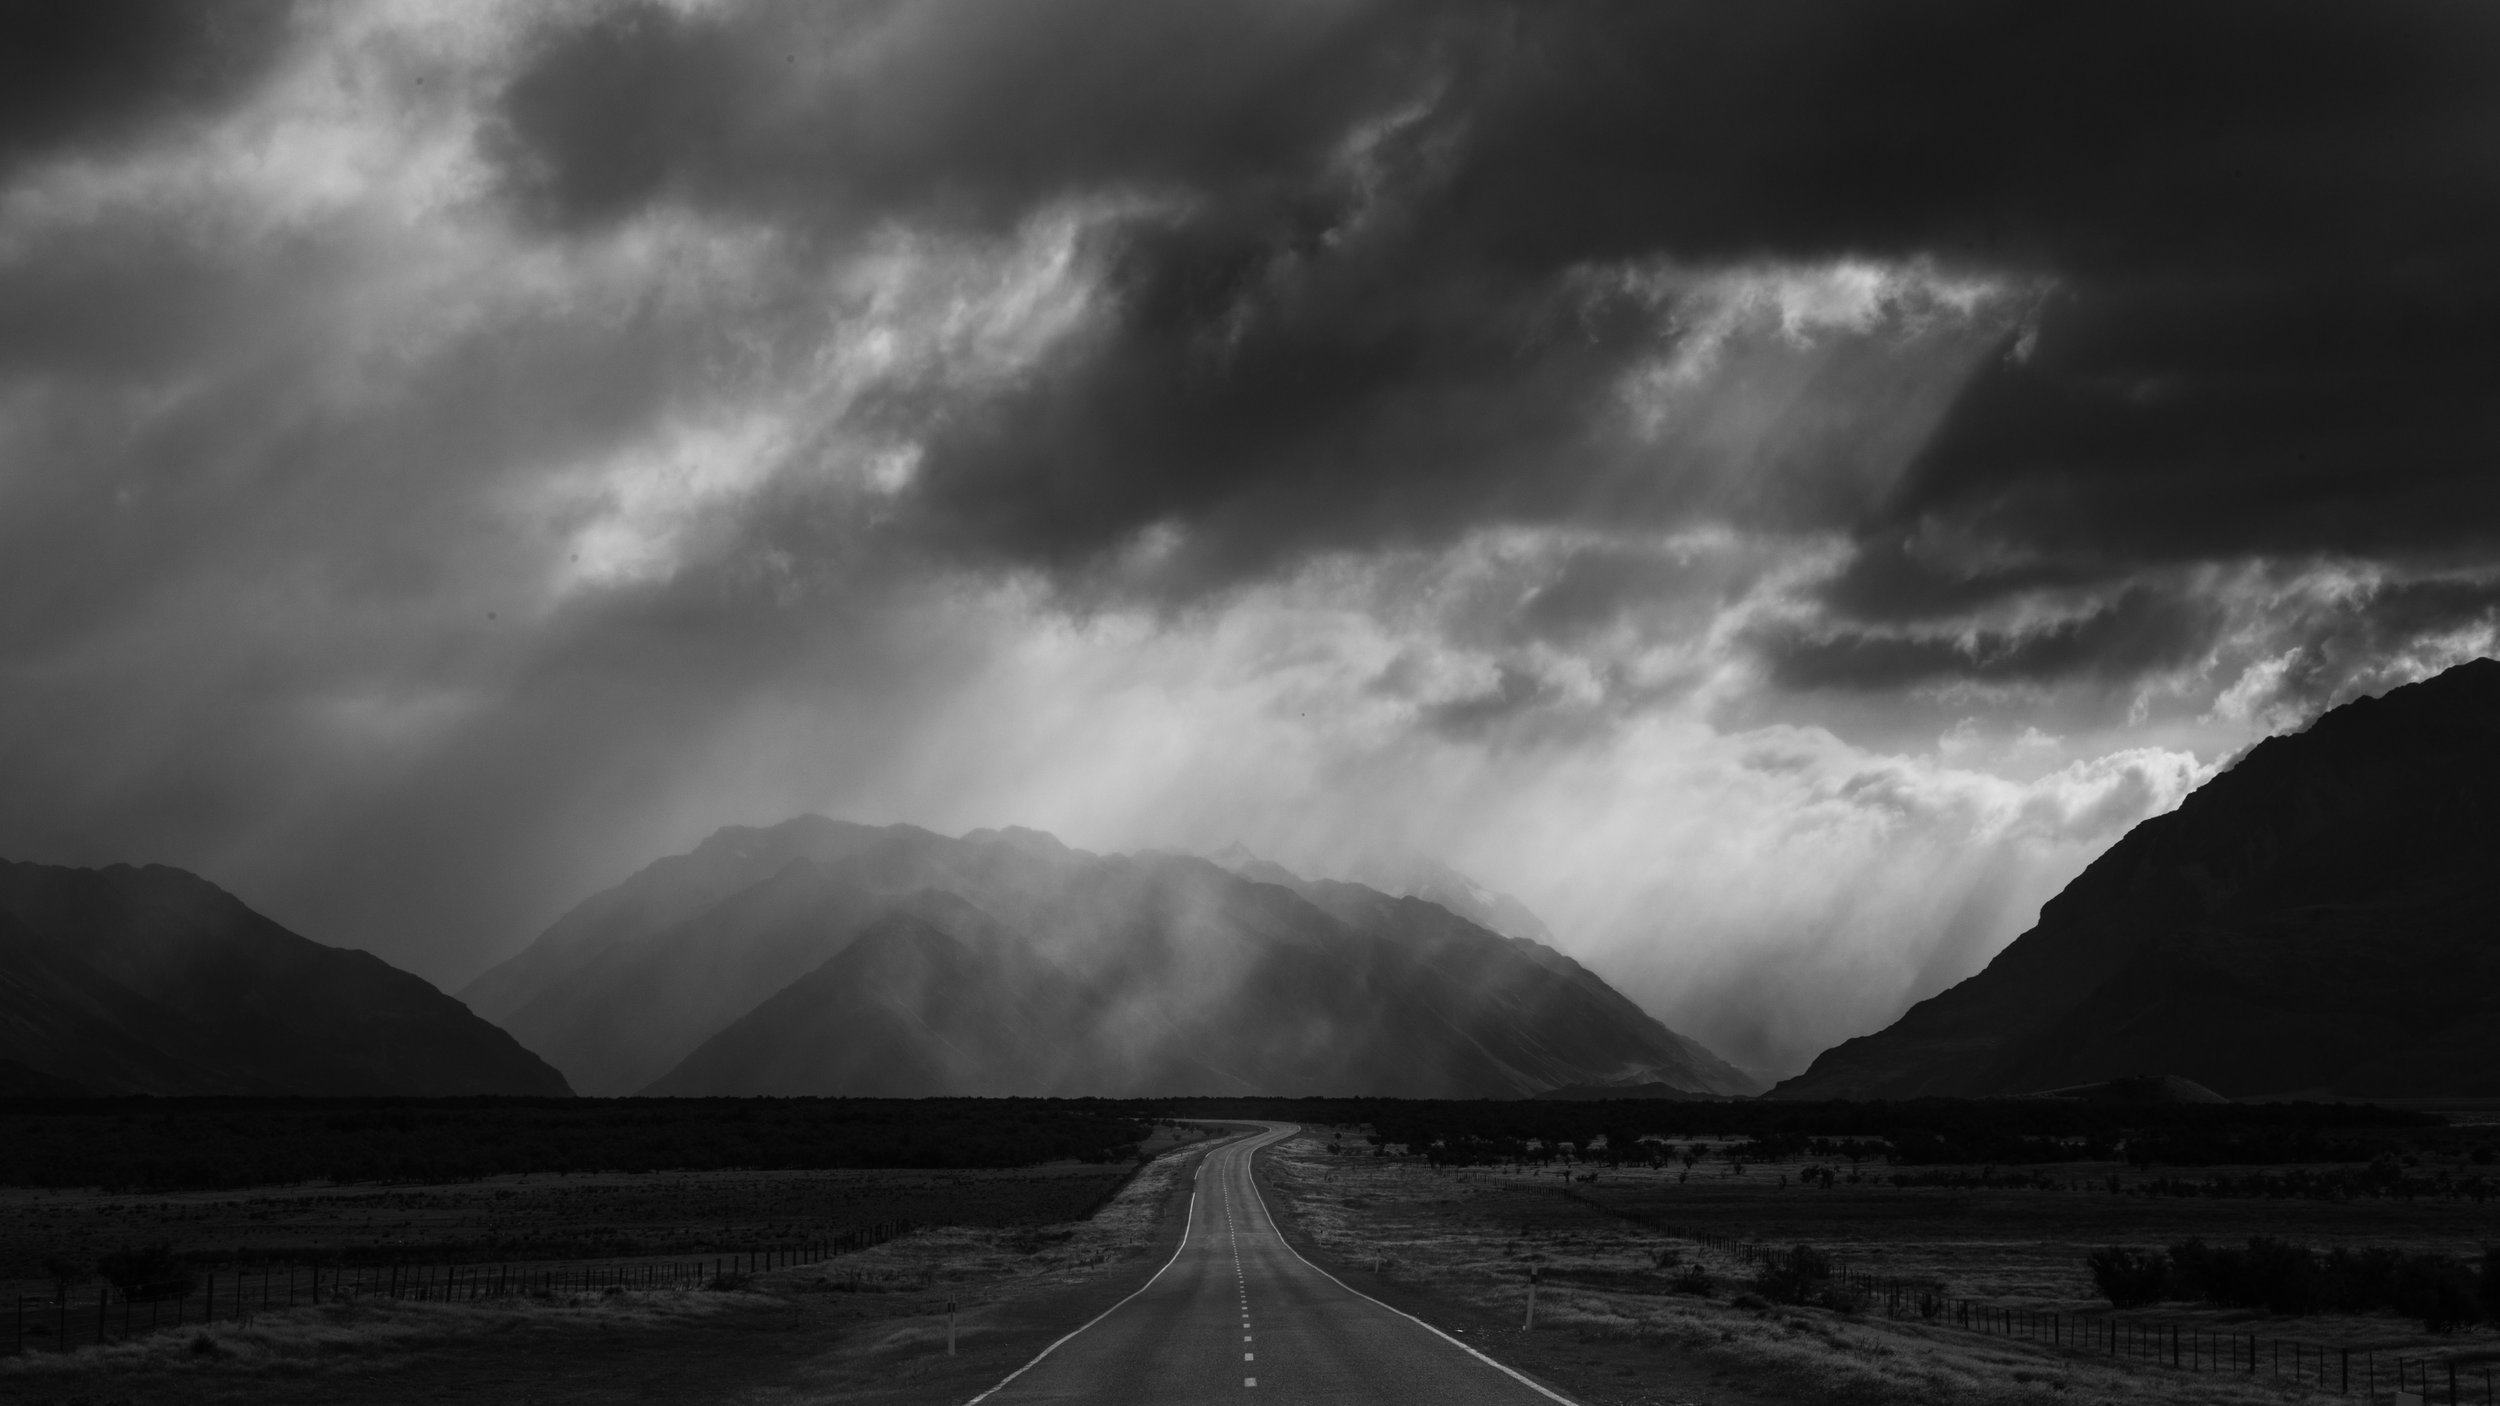 Geoff Cloake, Highway Storm, awarded in the psnz canon national exhibition